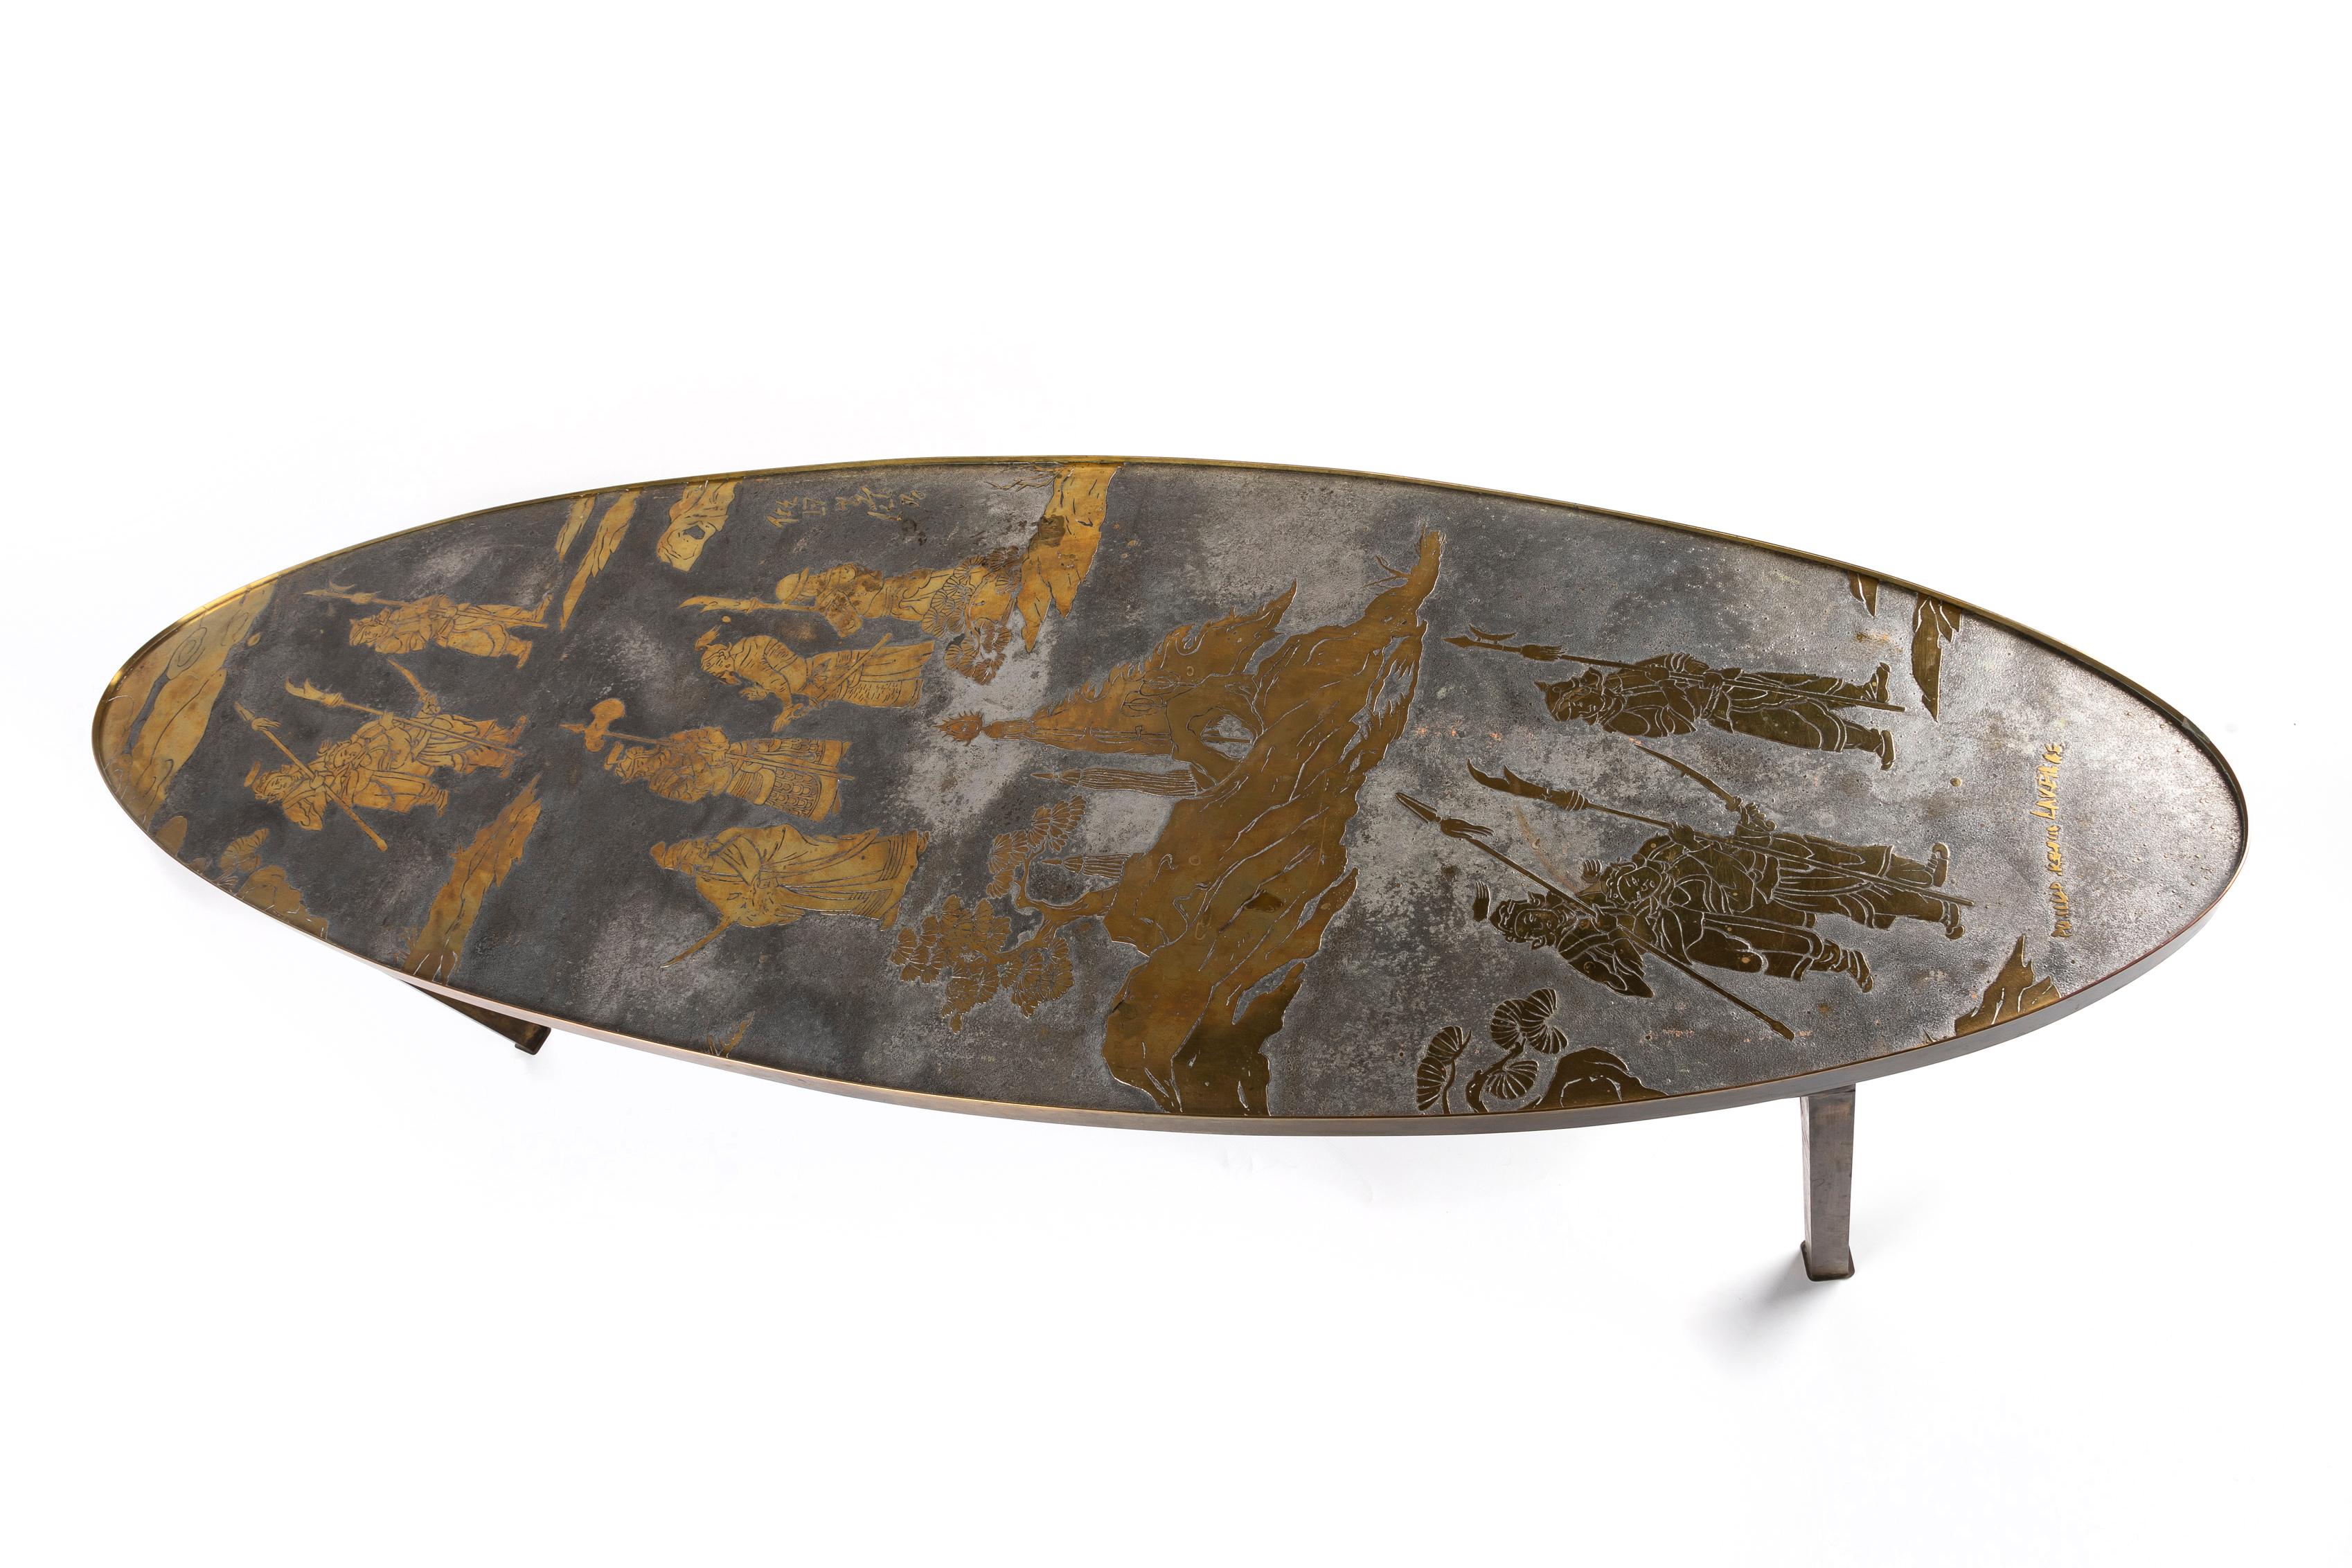 An Oval form etched bronze Coffee table designed by Philip and Kelvin Laverne. This unique coffee table is of two tone depicting chinoiserie figures.